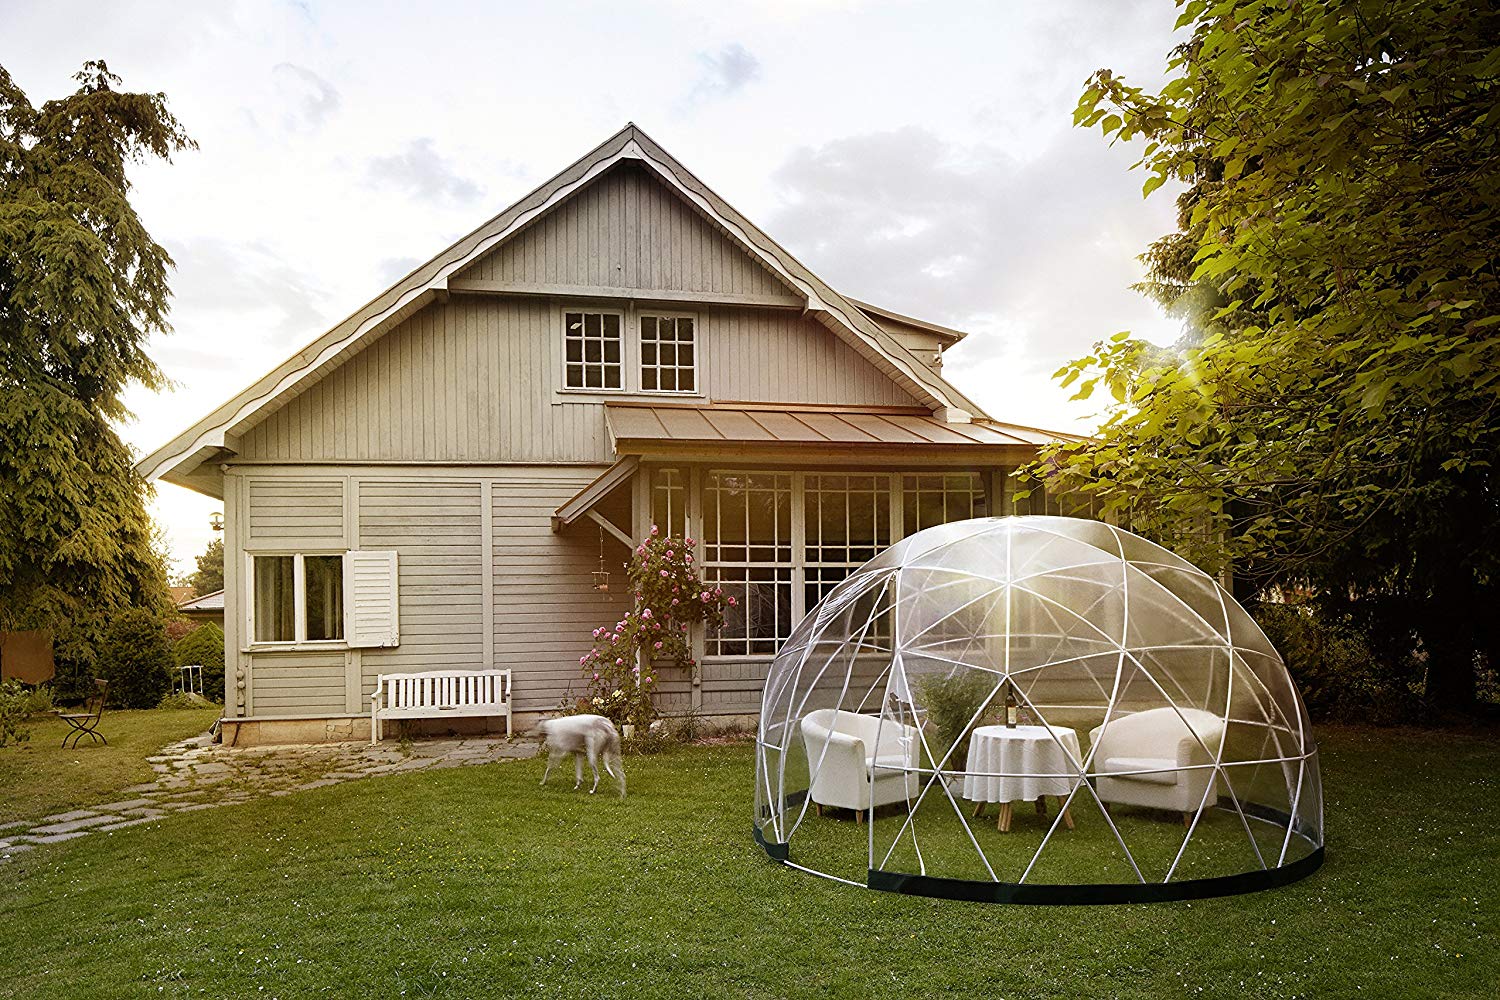 You can now buy a glass garden igloo for when you just need a damn minute to yourself